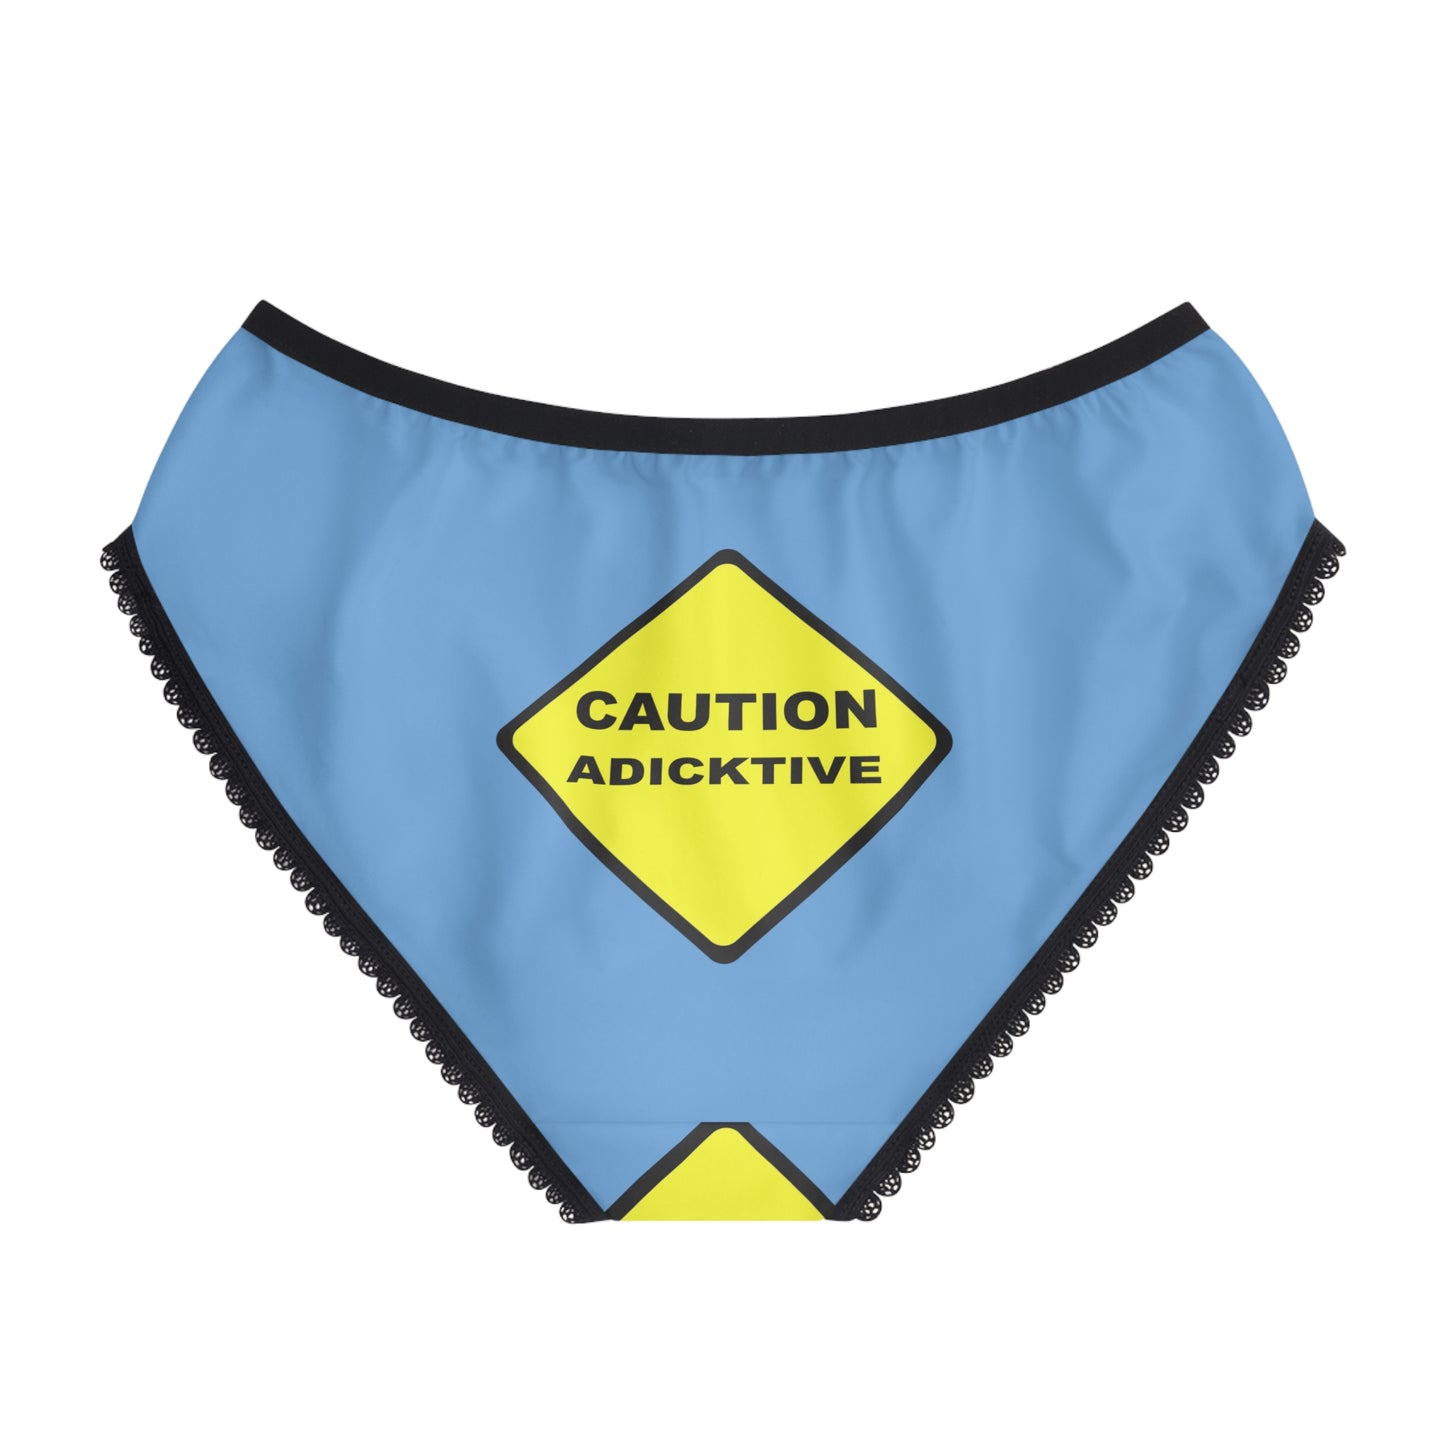 Caution Adicktive- Funny And Sexy Printed -Adult Woman Panties